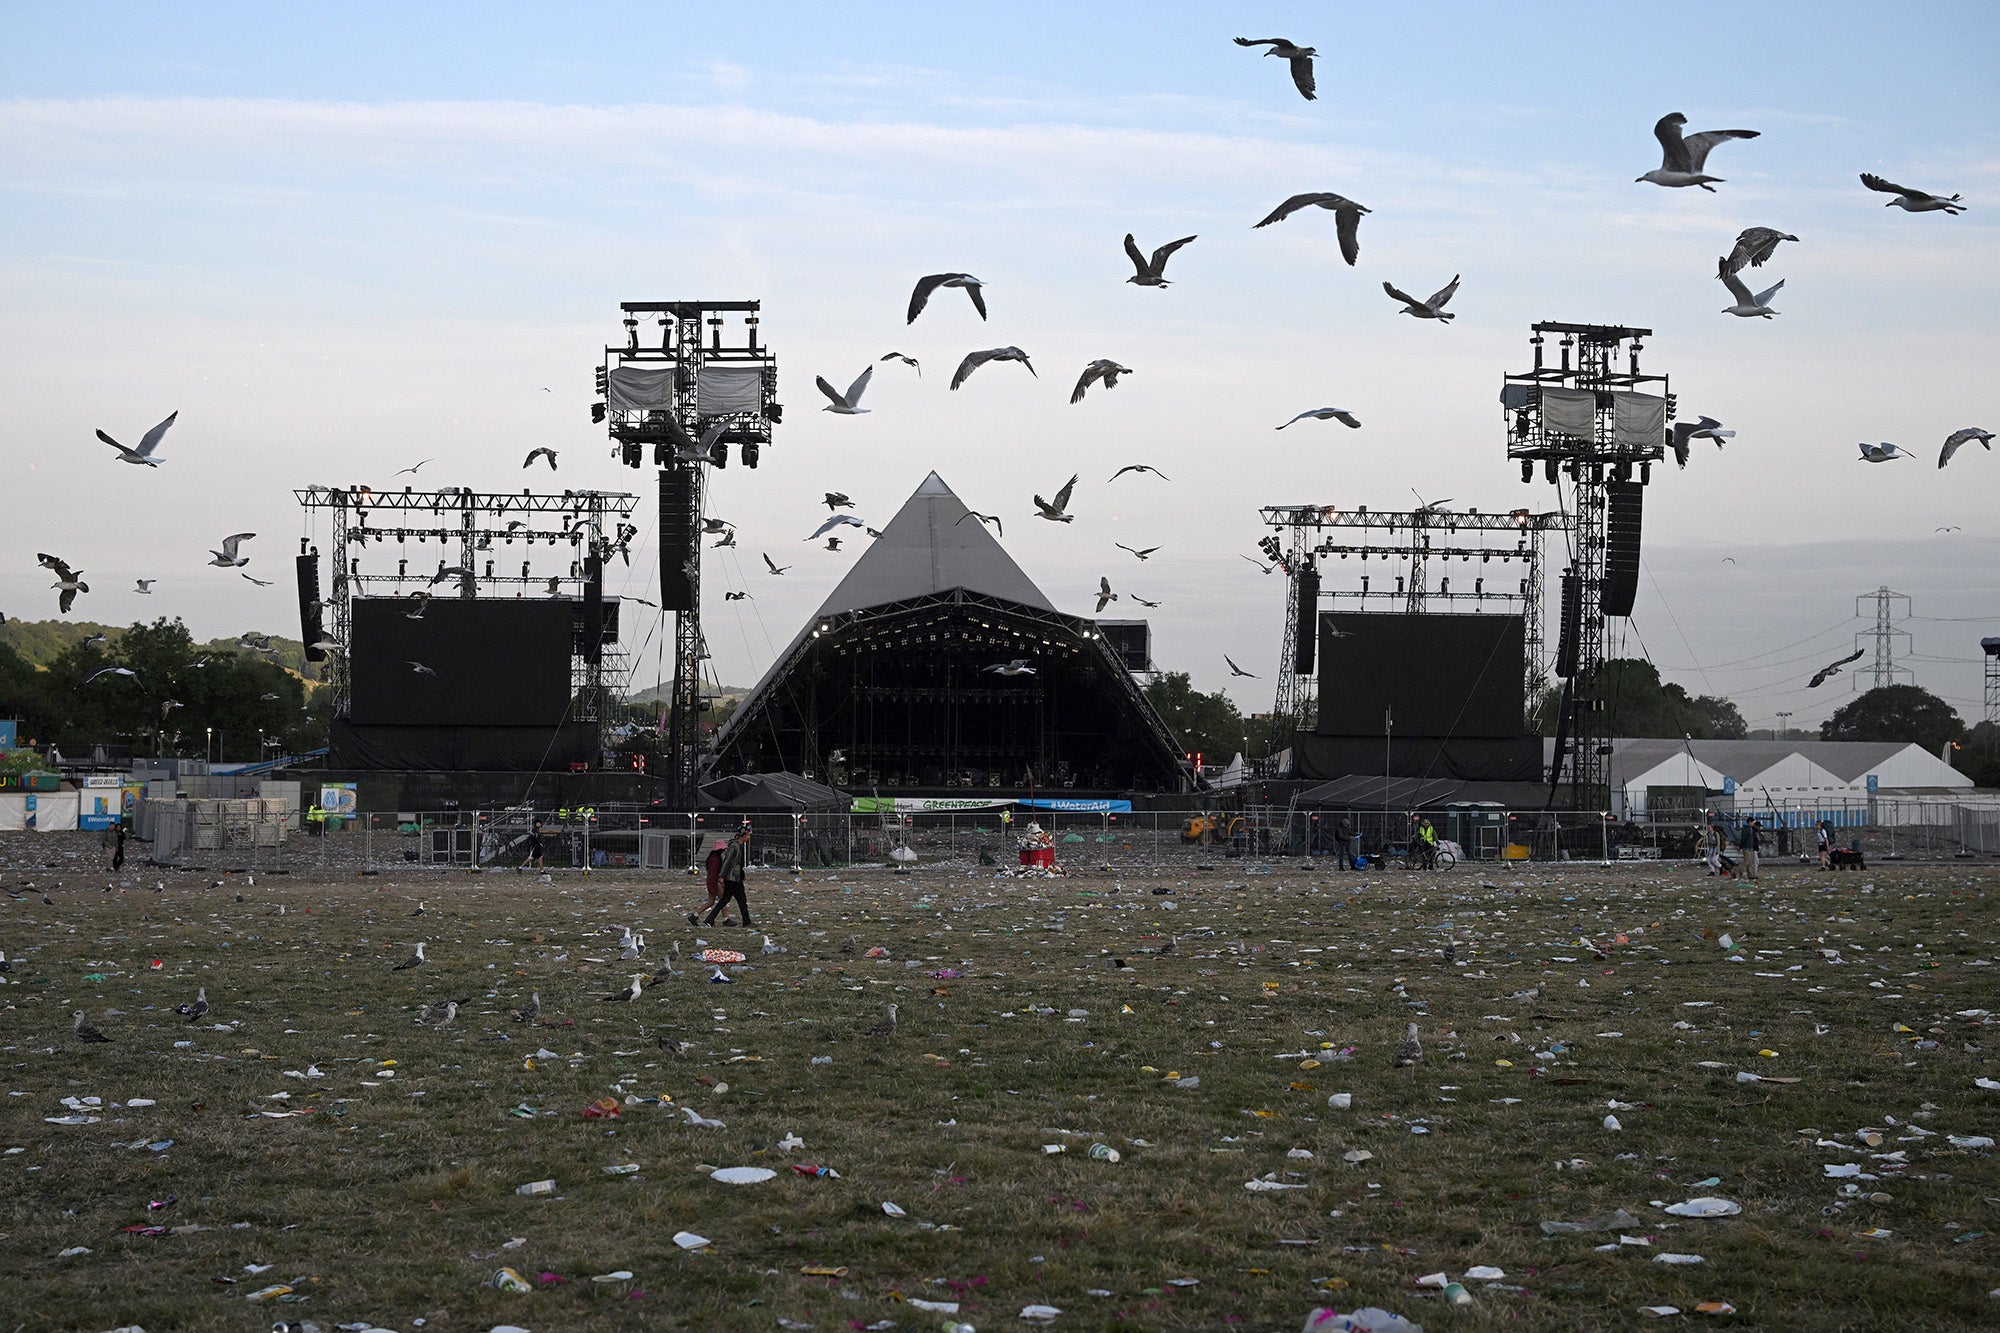 Seagulls fly overhead the litter-strewn field by the festival’s Pyramid Stage on Monday morning before the cleanup